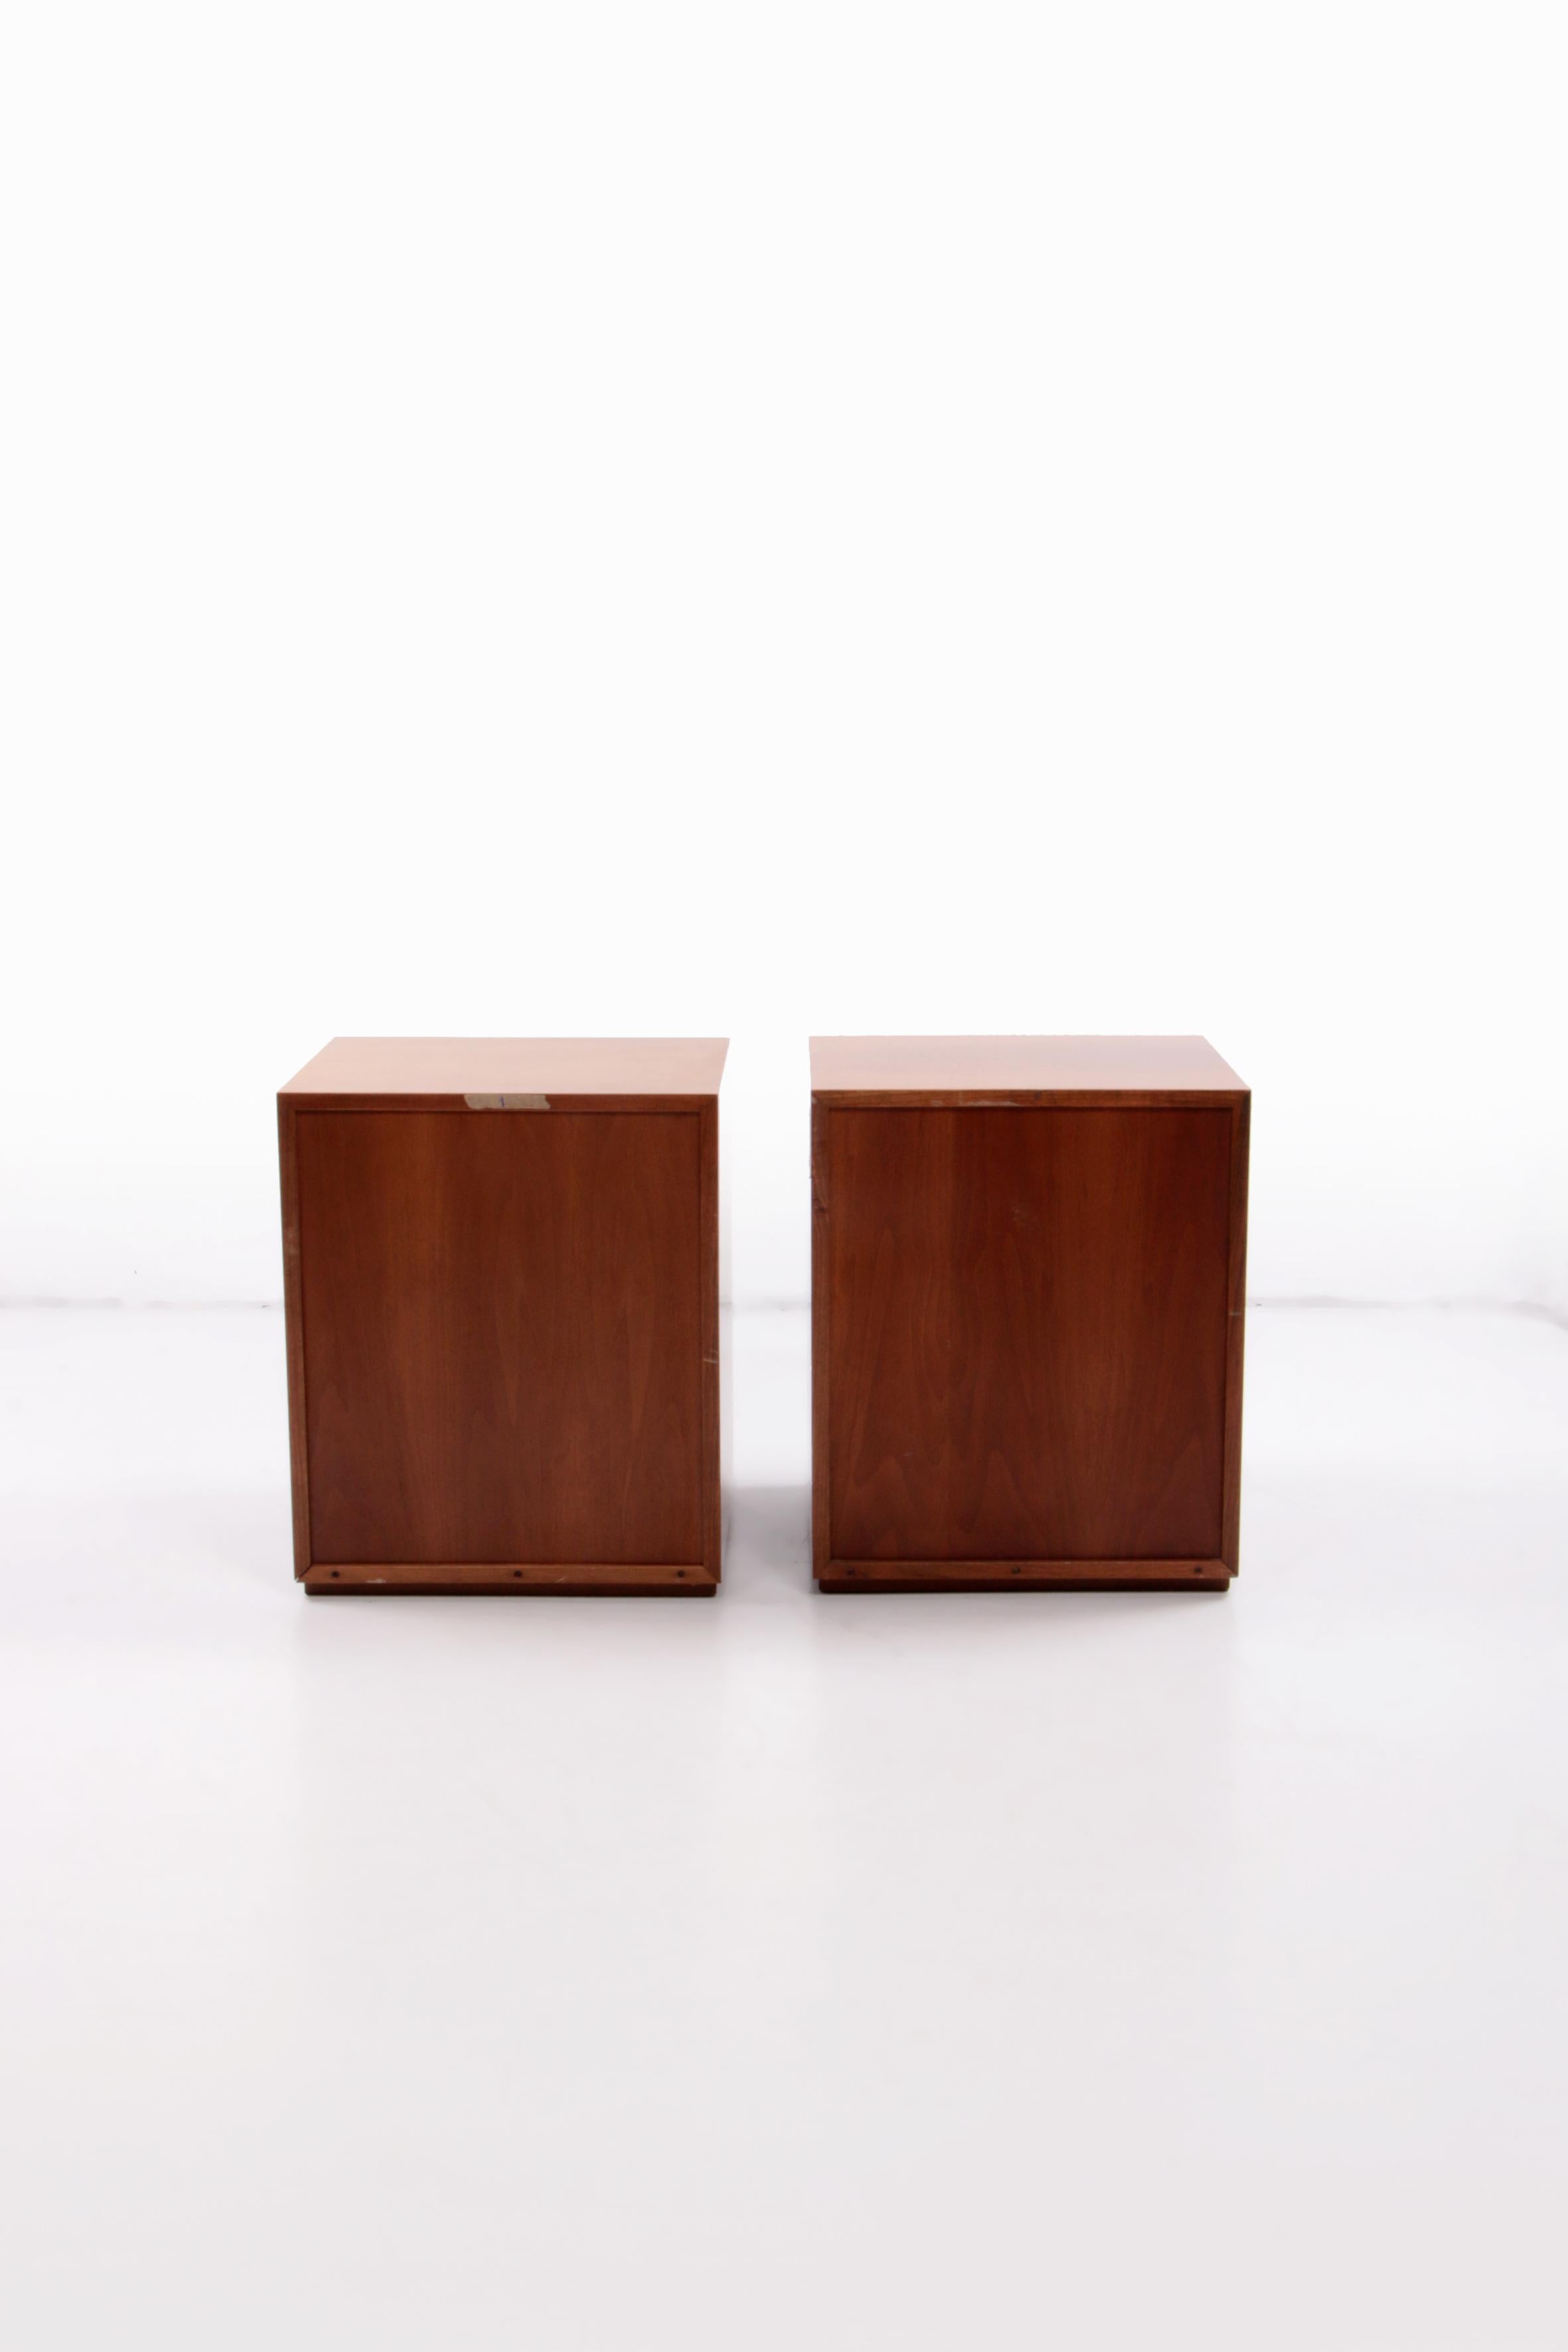 Late 20th Century Vintage Luciano Frigerio Bedside Tables with Graphic Doors, 1970s Italy. For Sale